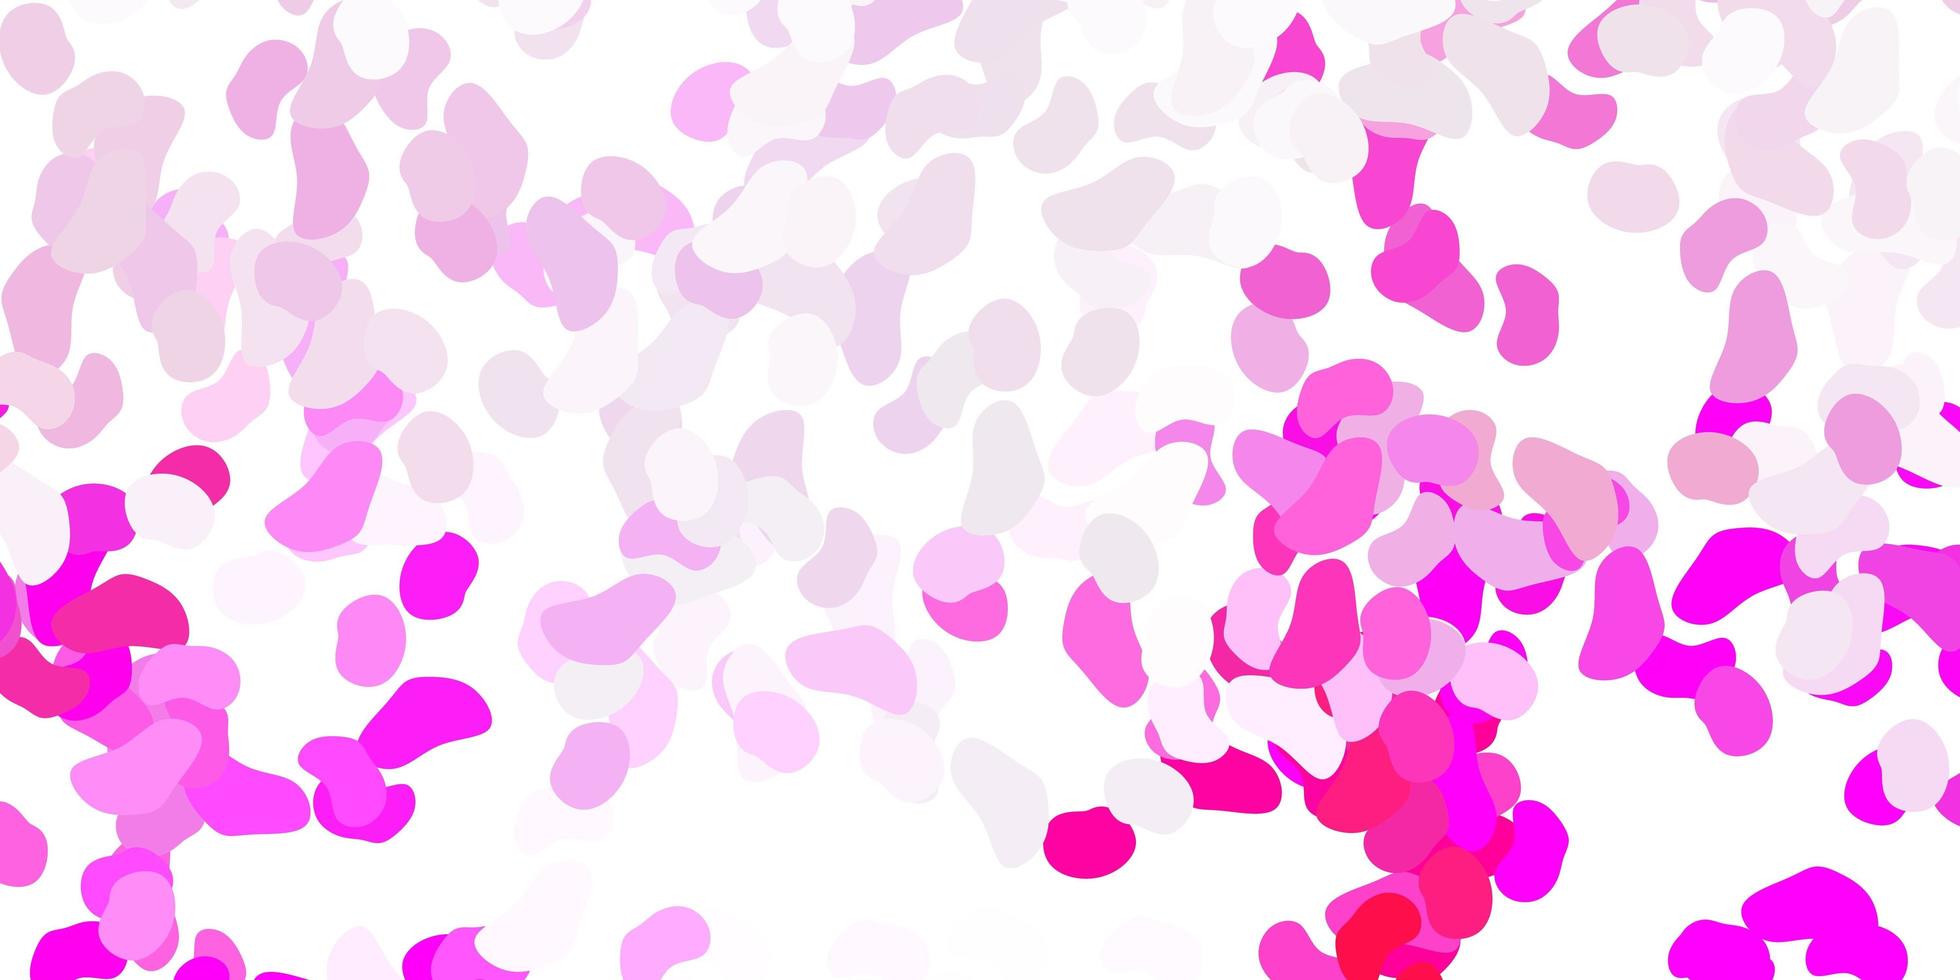 Light pink vector backdrop with chaotic shapes.